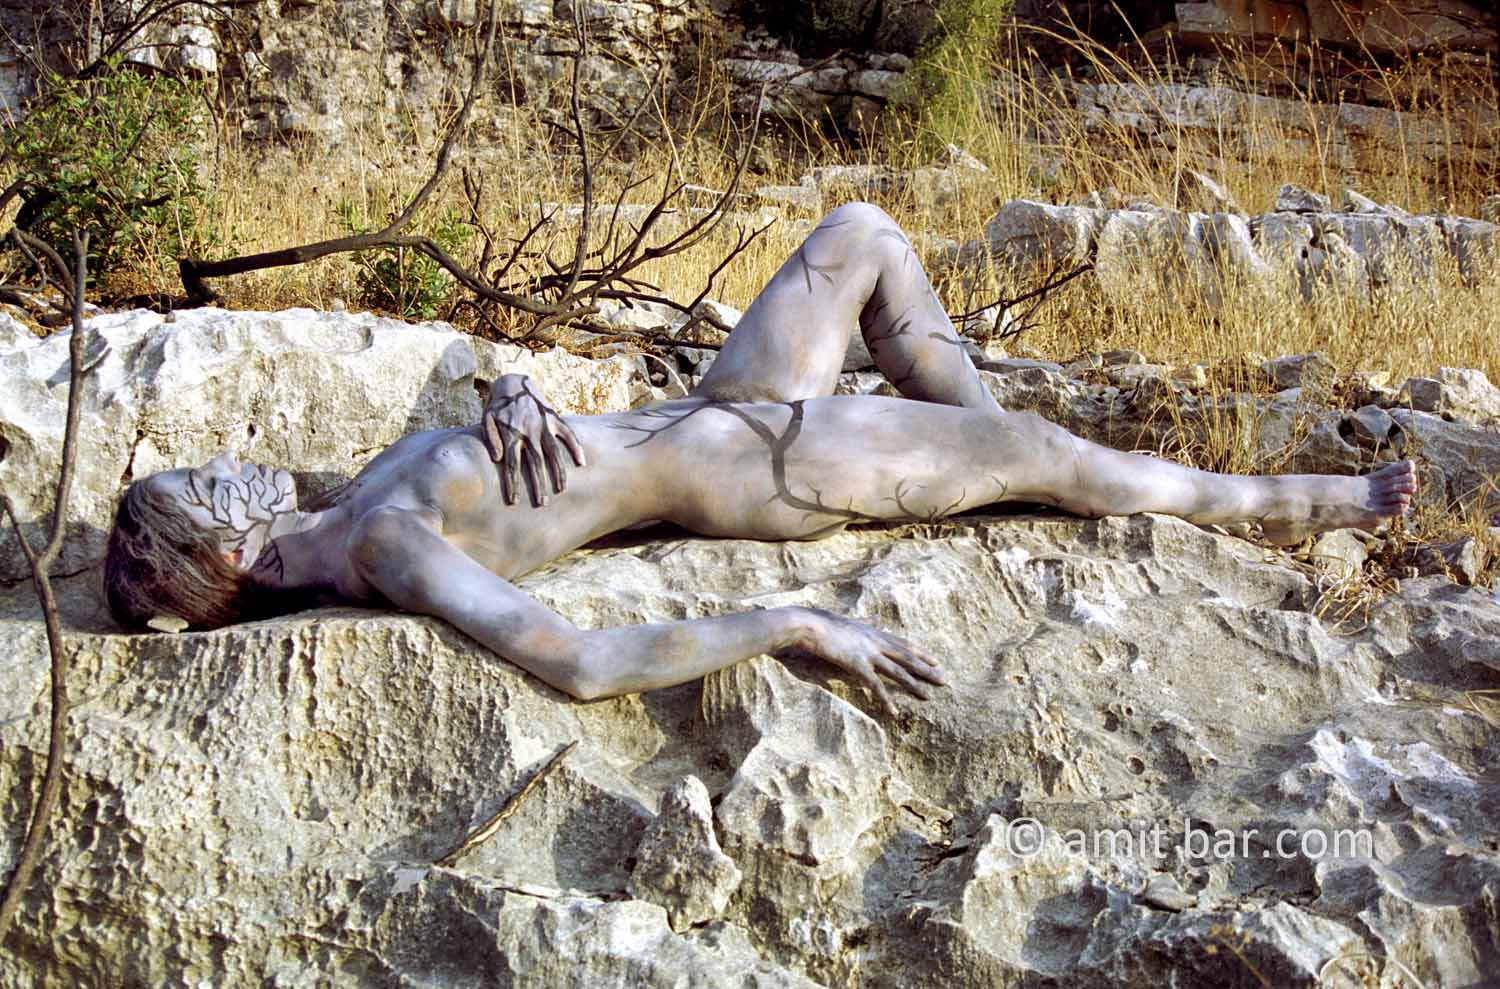 On the rocks I: Body-painted model in the Israeli nature